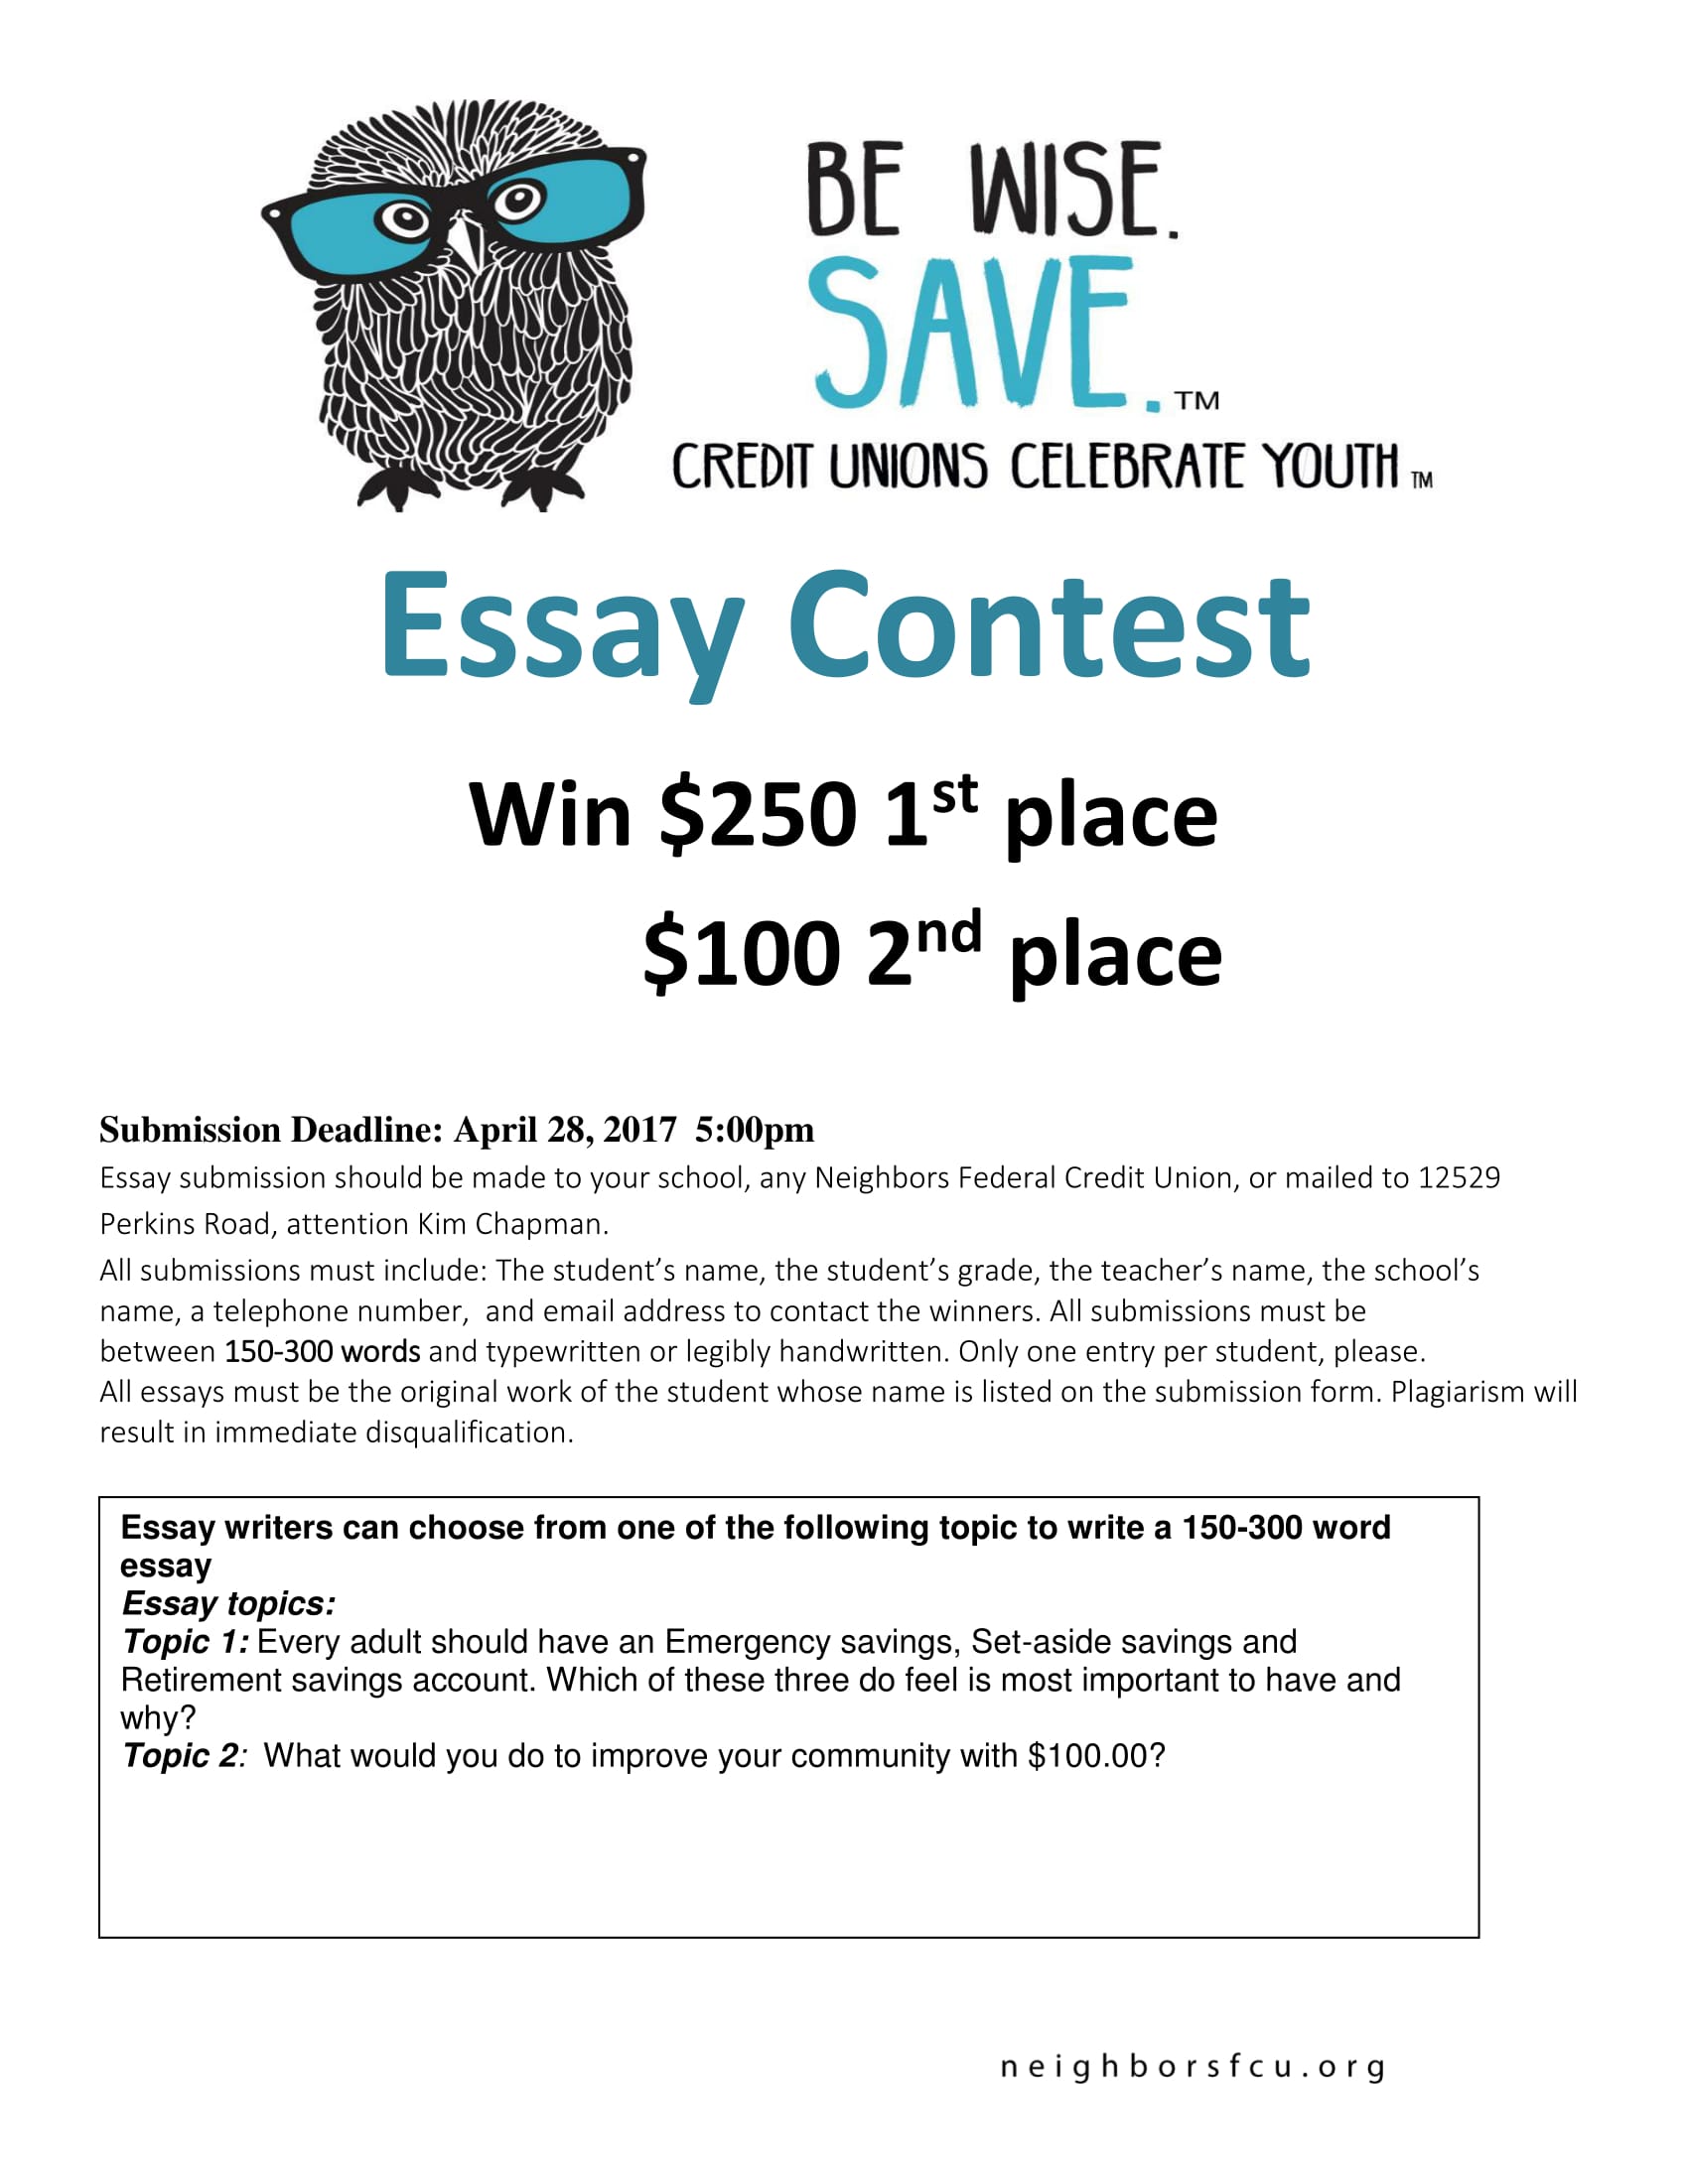 National essay contests for high school students